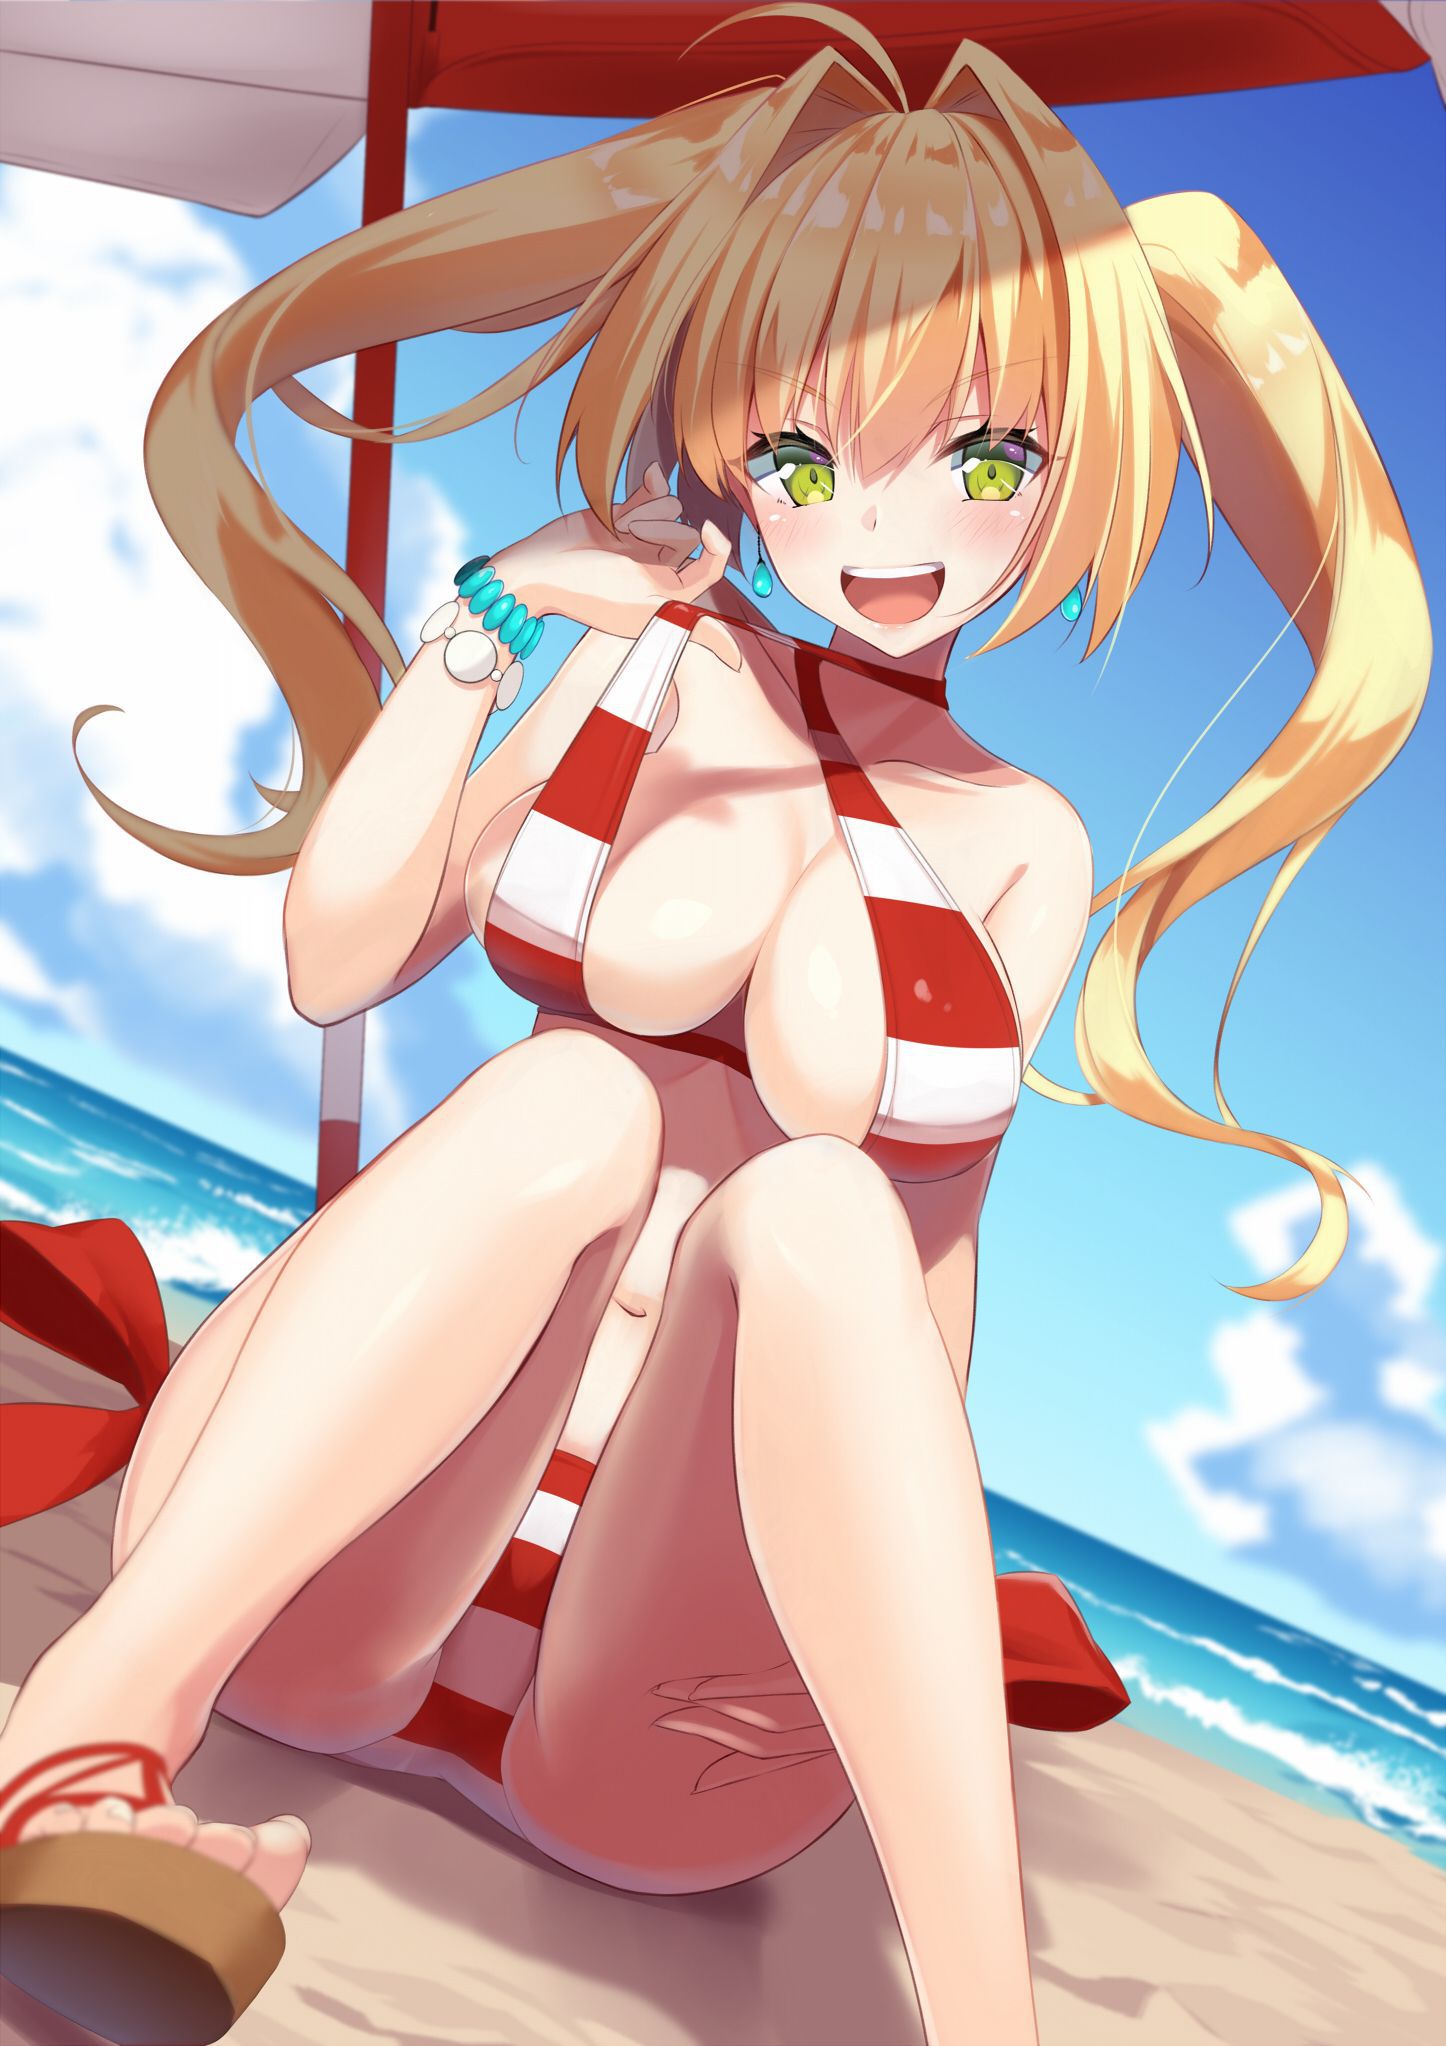 [Secondary ZIP] is about to start anime 100 pieces of cute image summary of Nero Claudius so soon 39